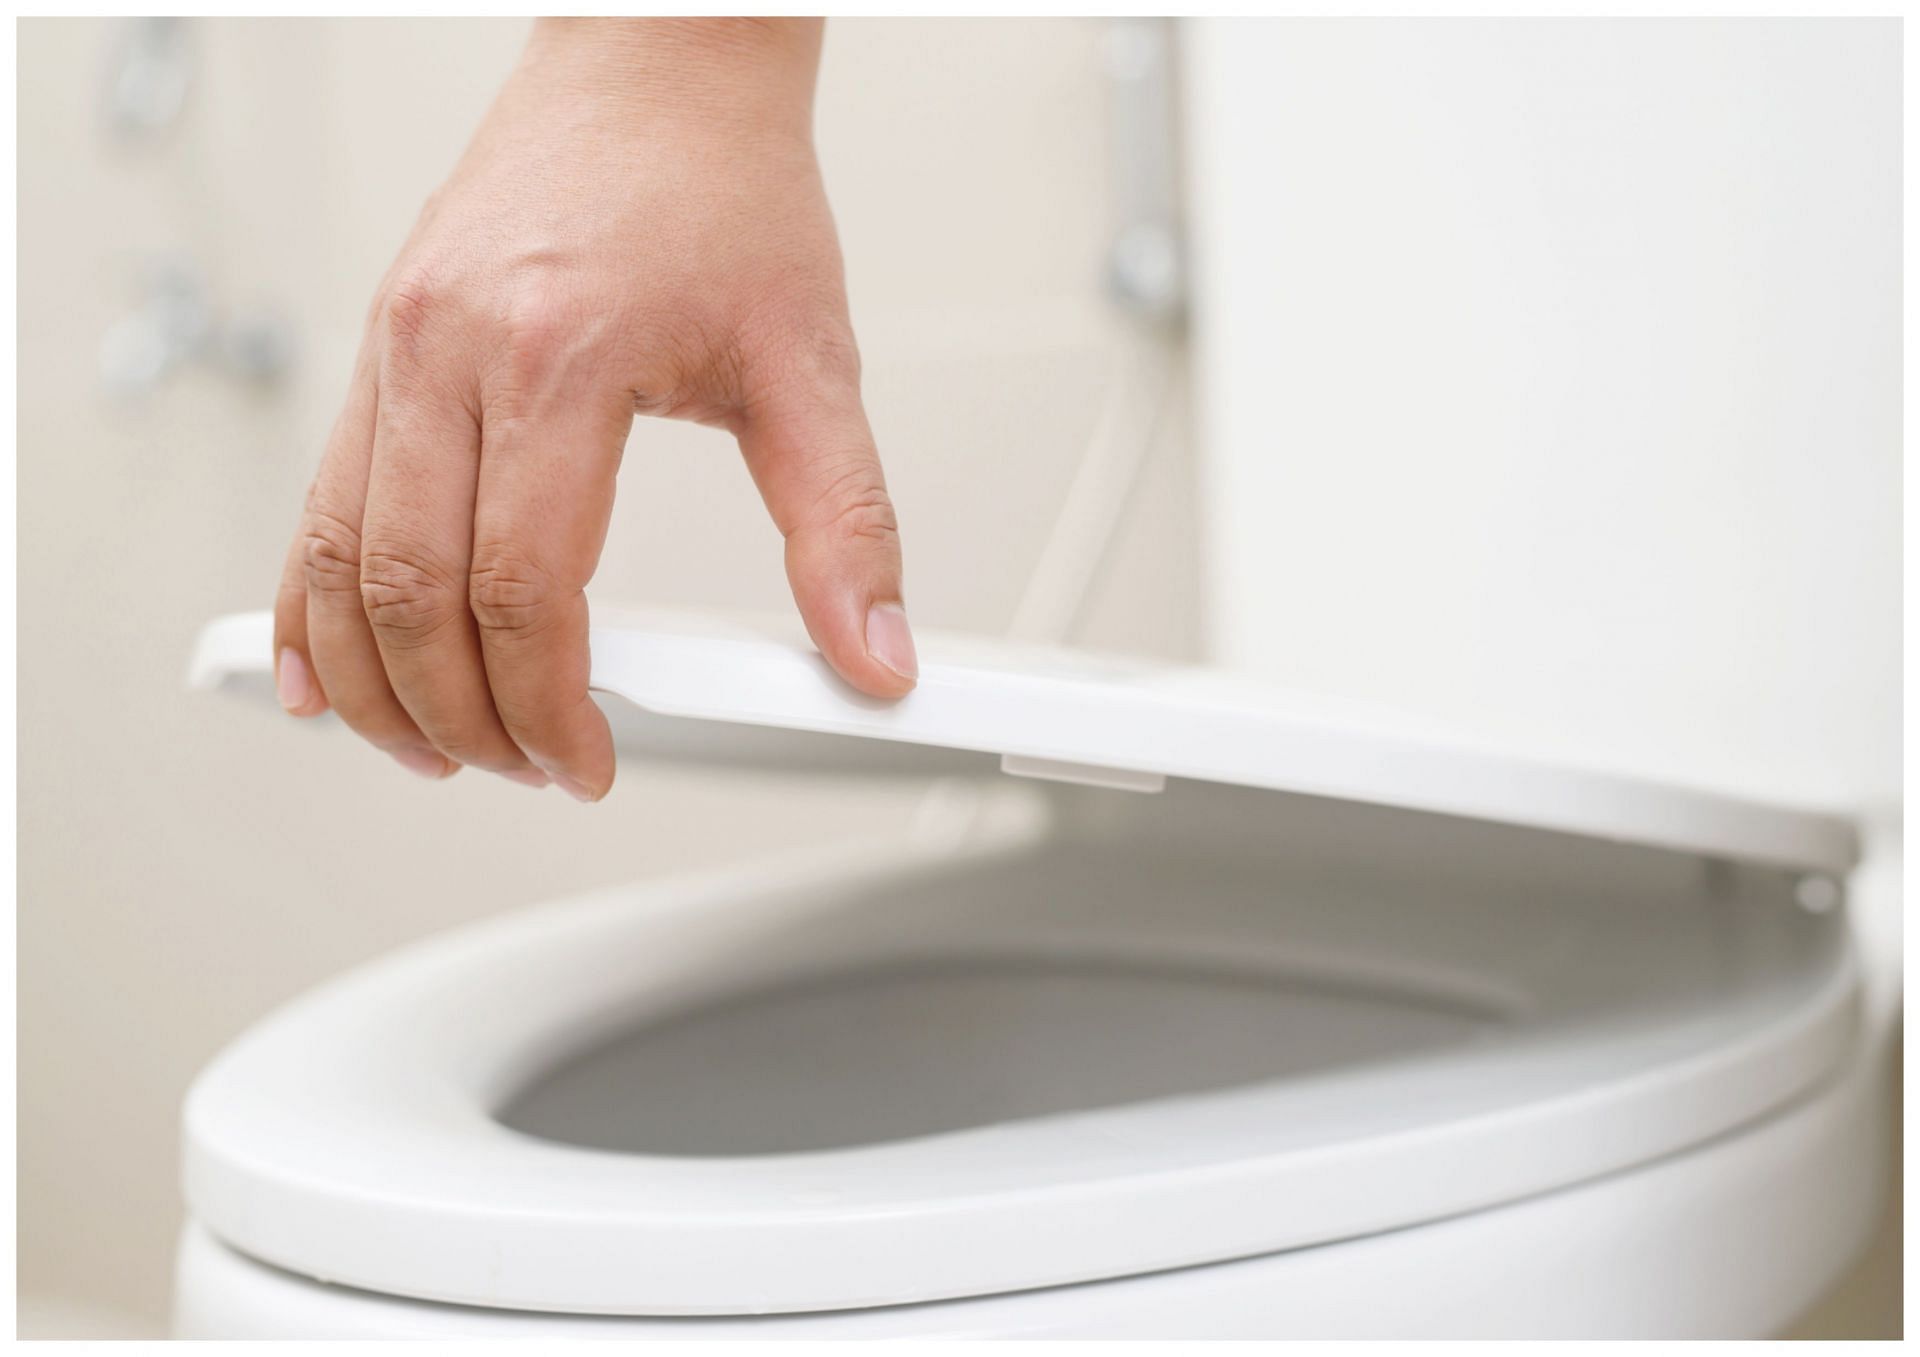 Should you flush with the toilet lid on or off? (Image via Vecteezy)